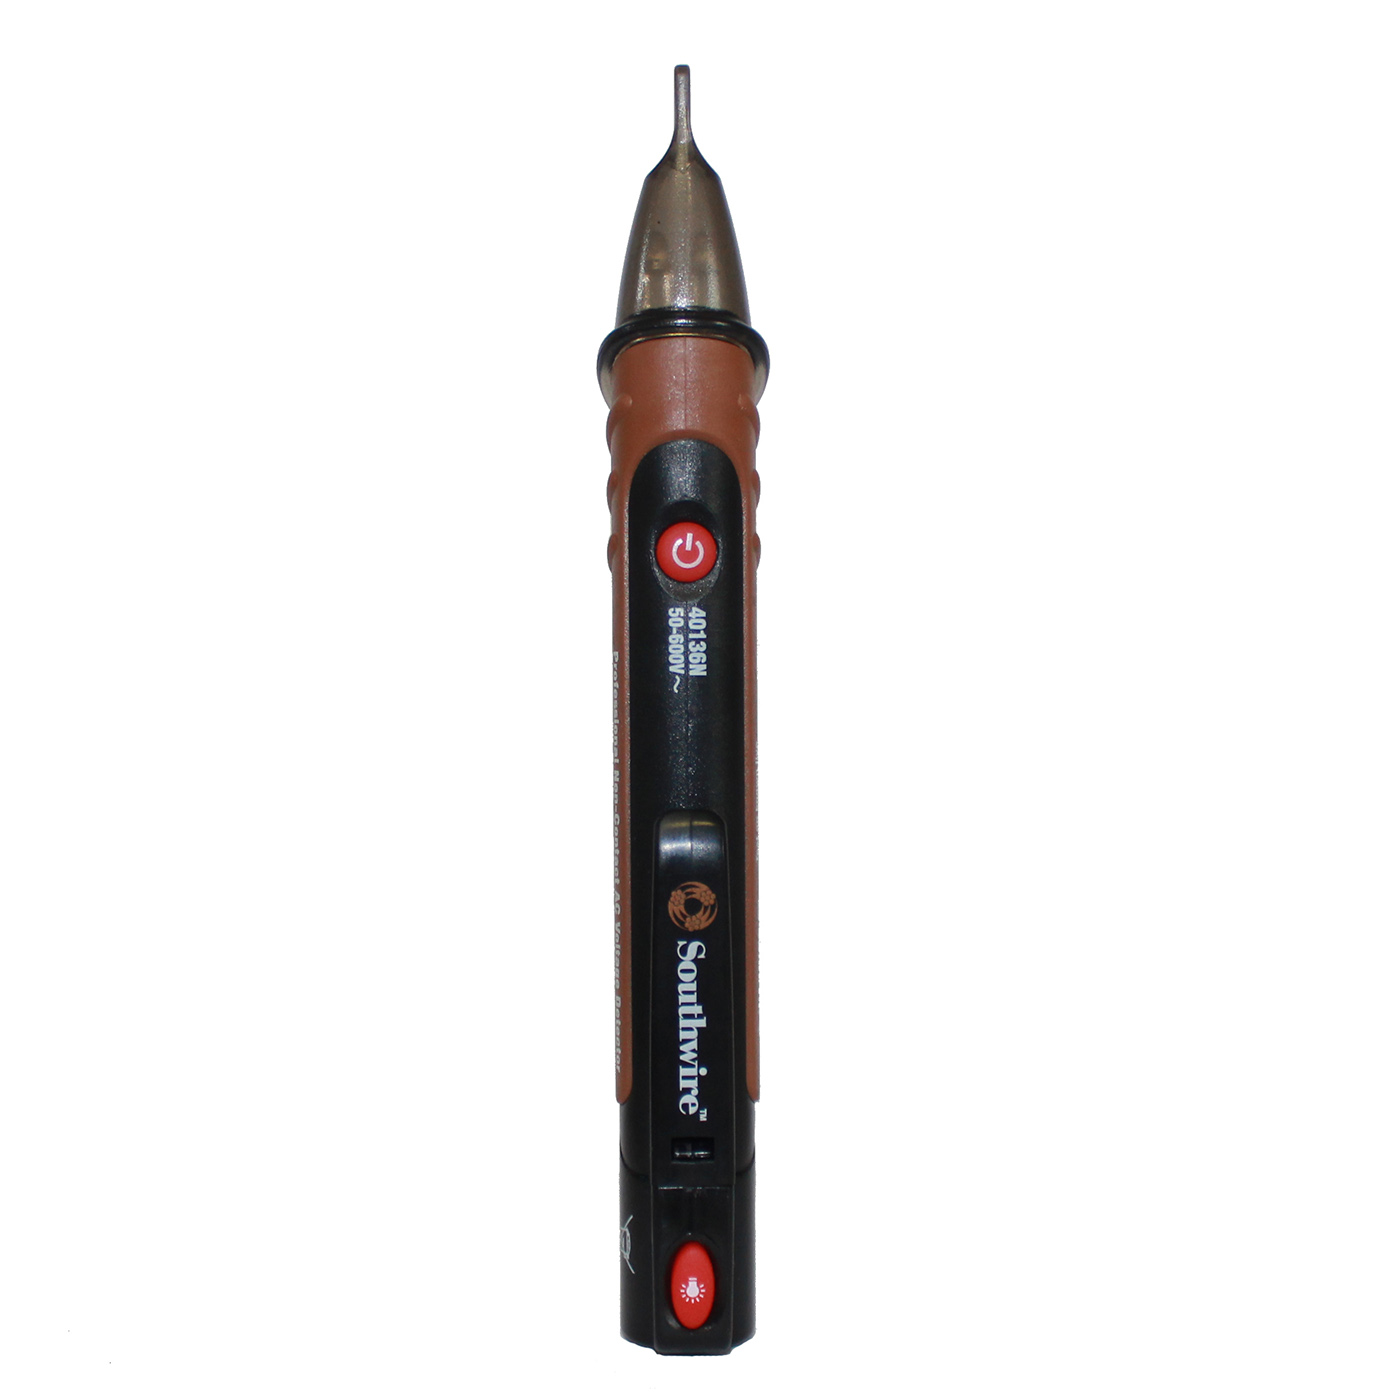 Non-contact AC voltage detector quickly checks for the presence of live voltage on wiring and electrical devices. Features a variable beep and flash rate to pinpoint voltage source and built-in flashlight for added convenience.